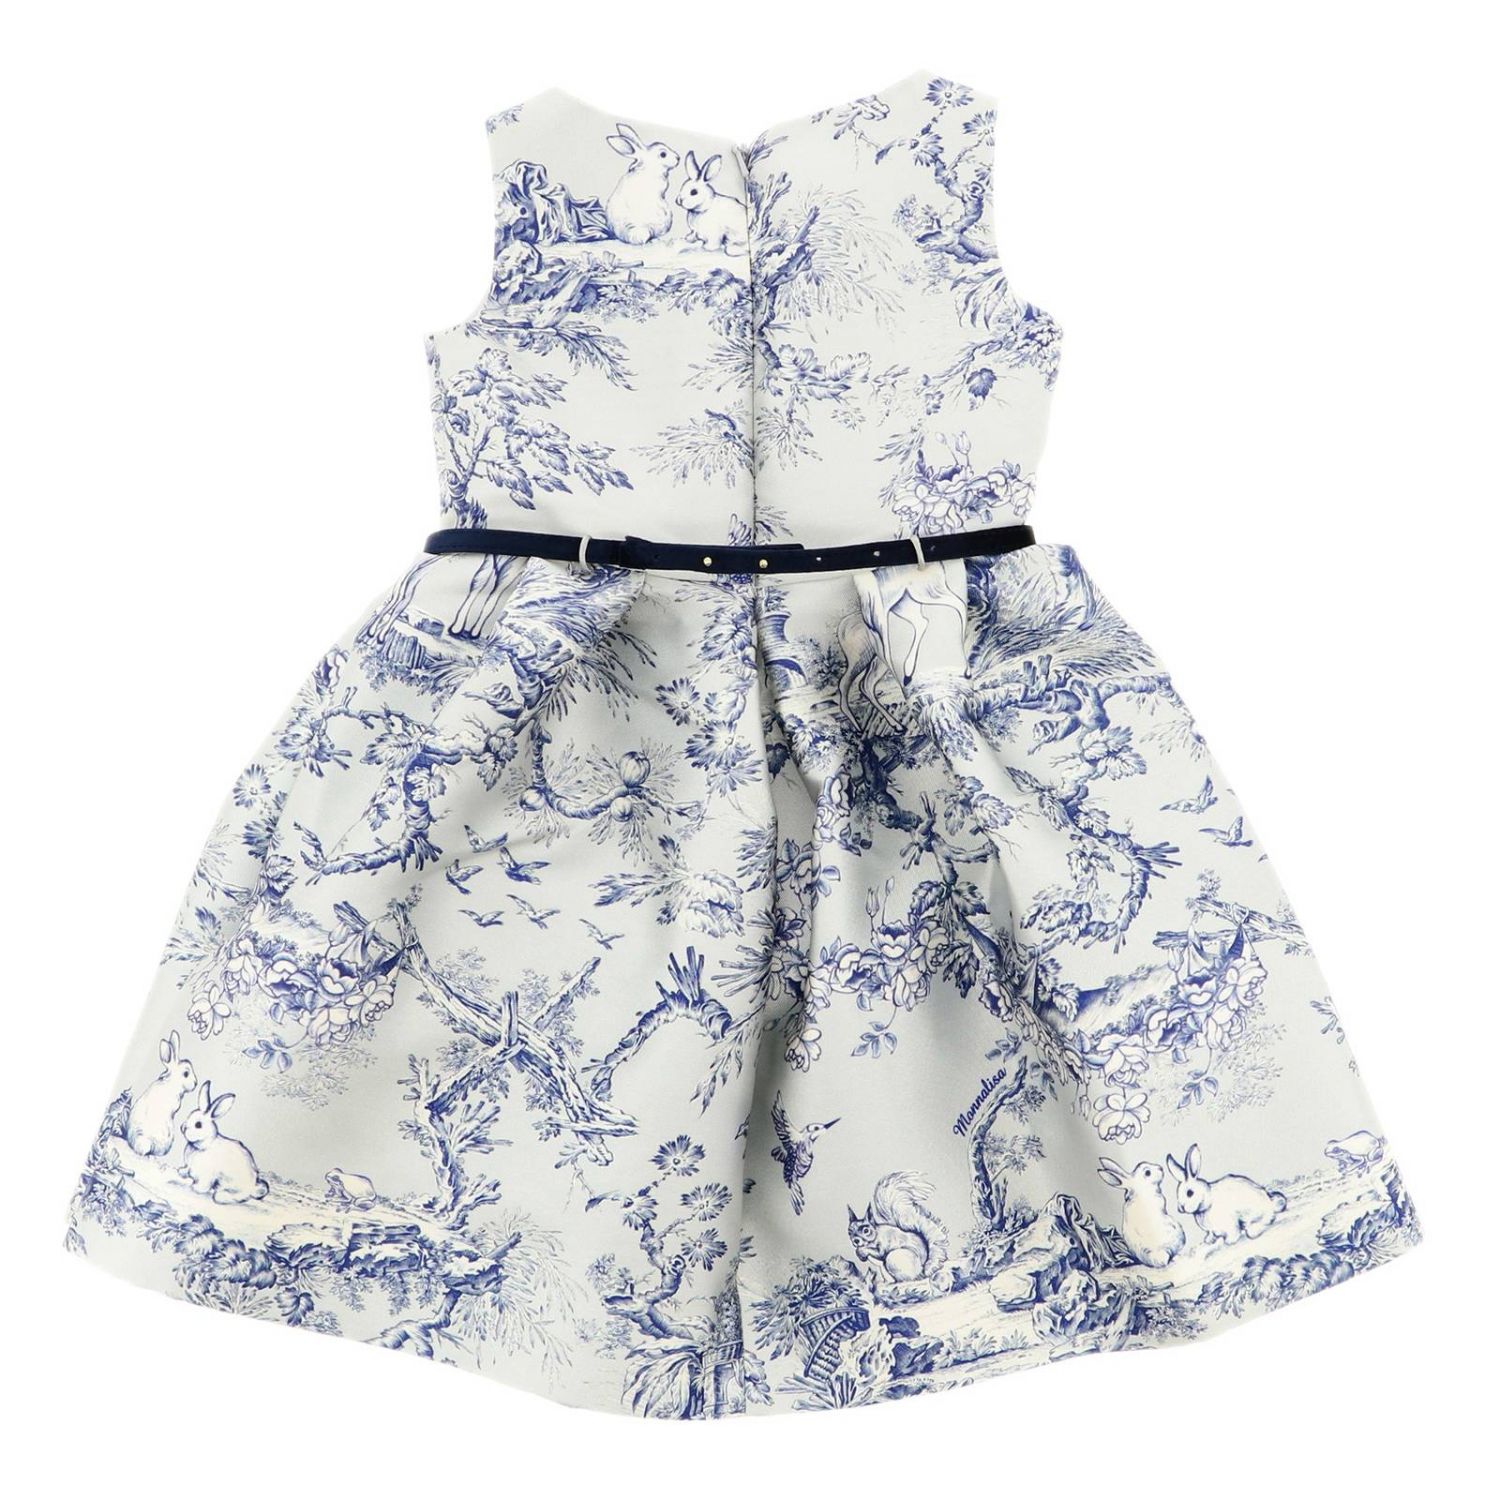 Monnalisa Chic Outlet: dress for girls - Sky Blue | Monnalisa Chic ...